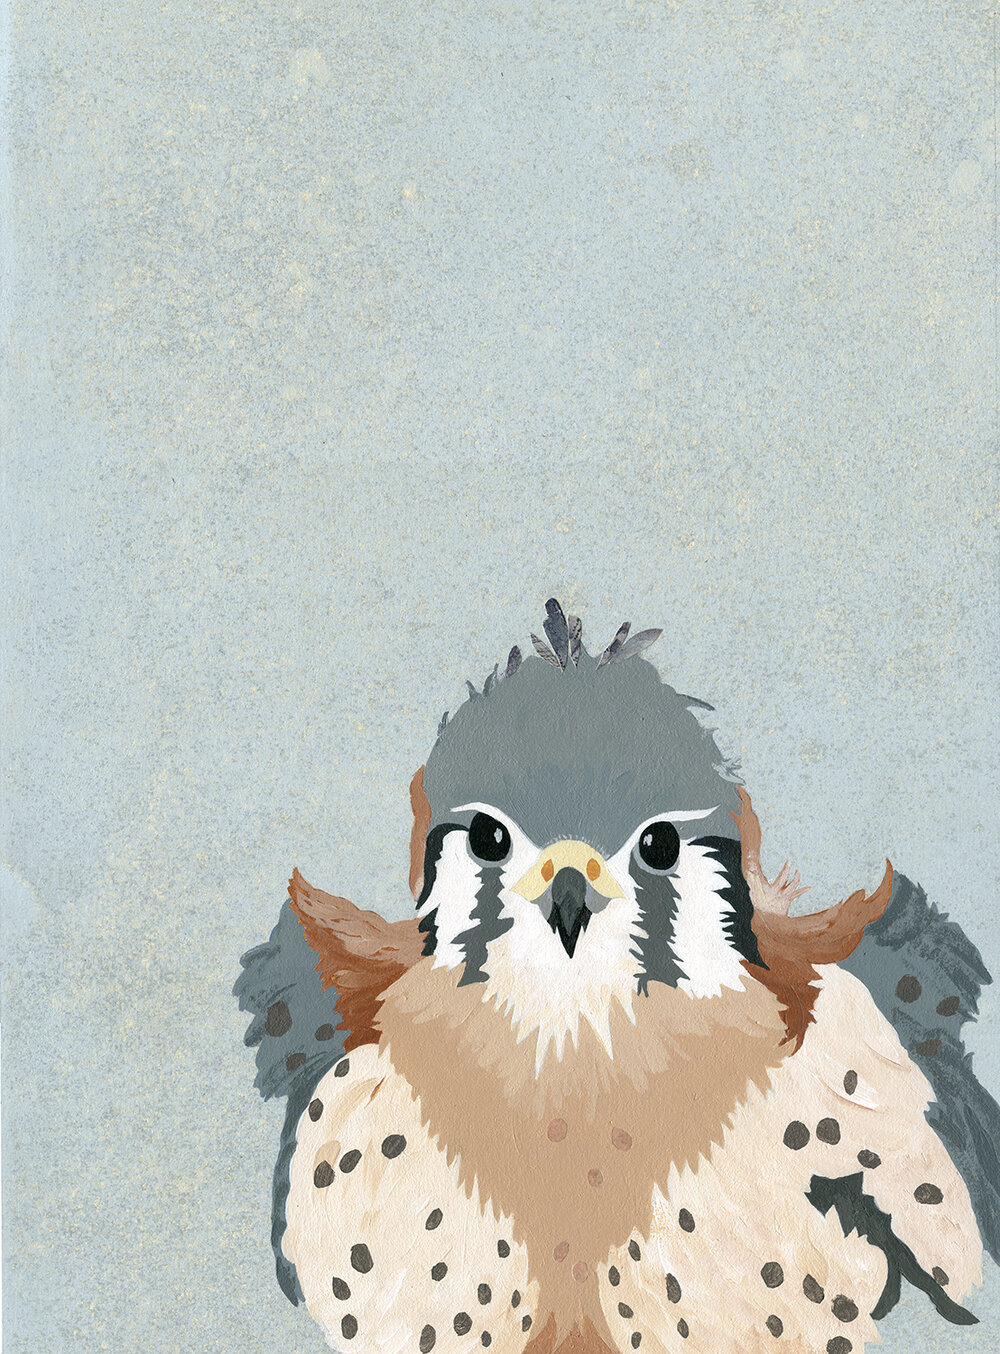 Watercolor Painting with Ronna: The American Kestrel - Portland